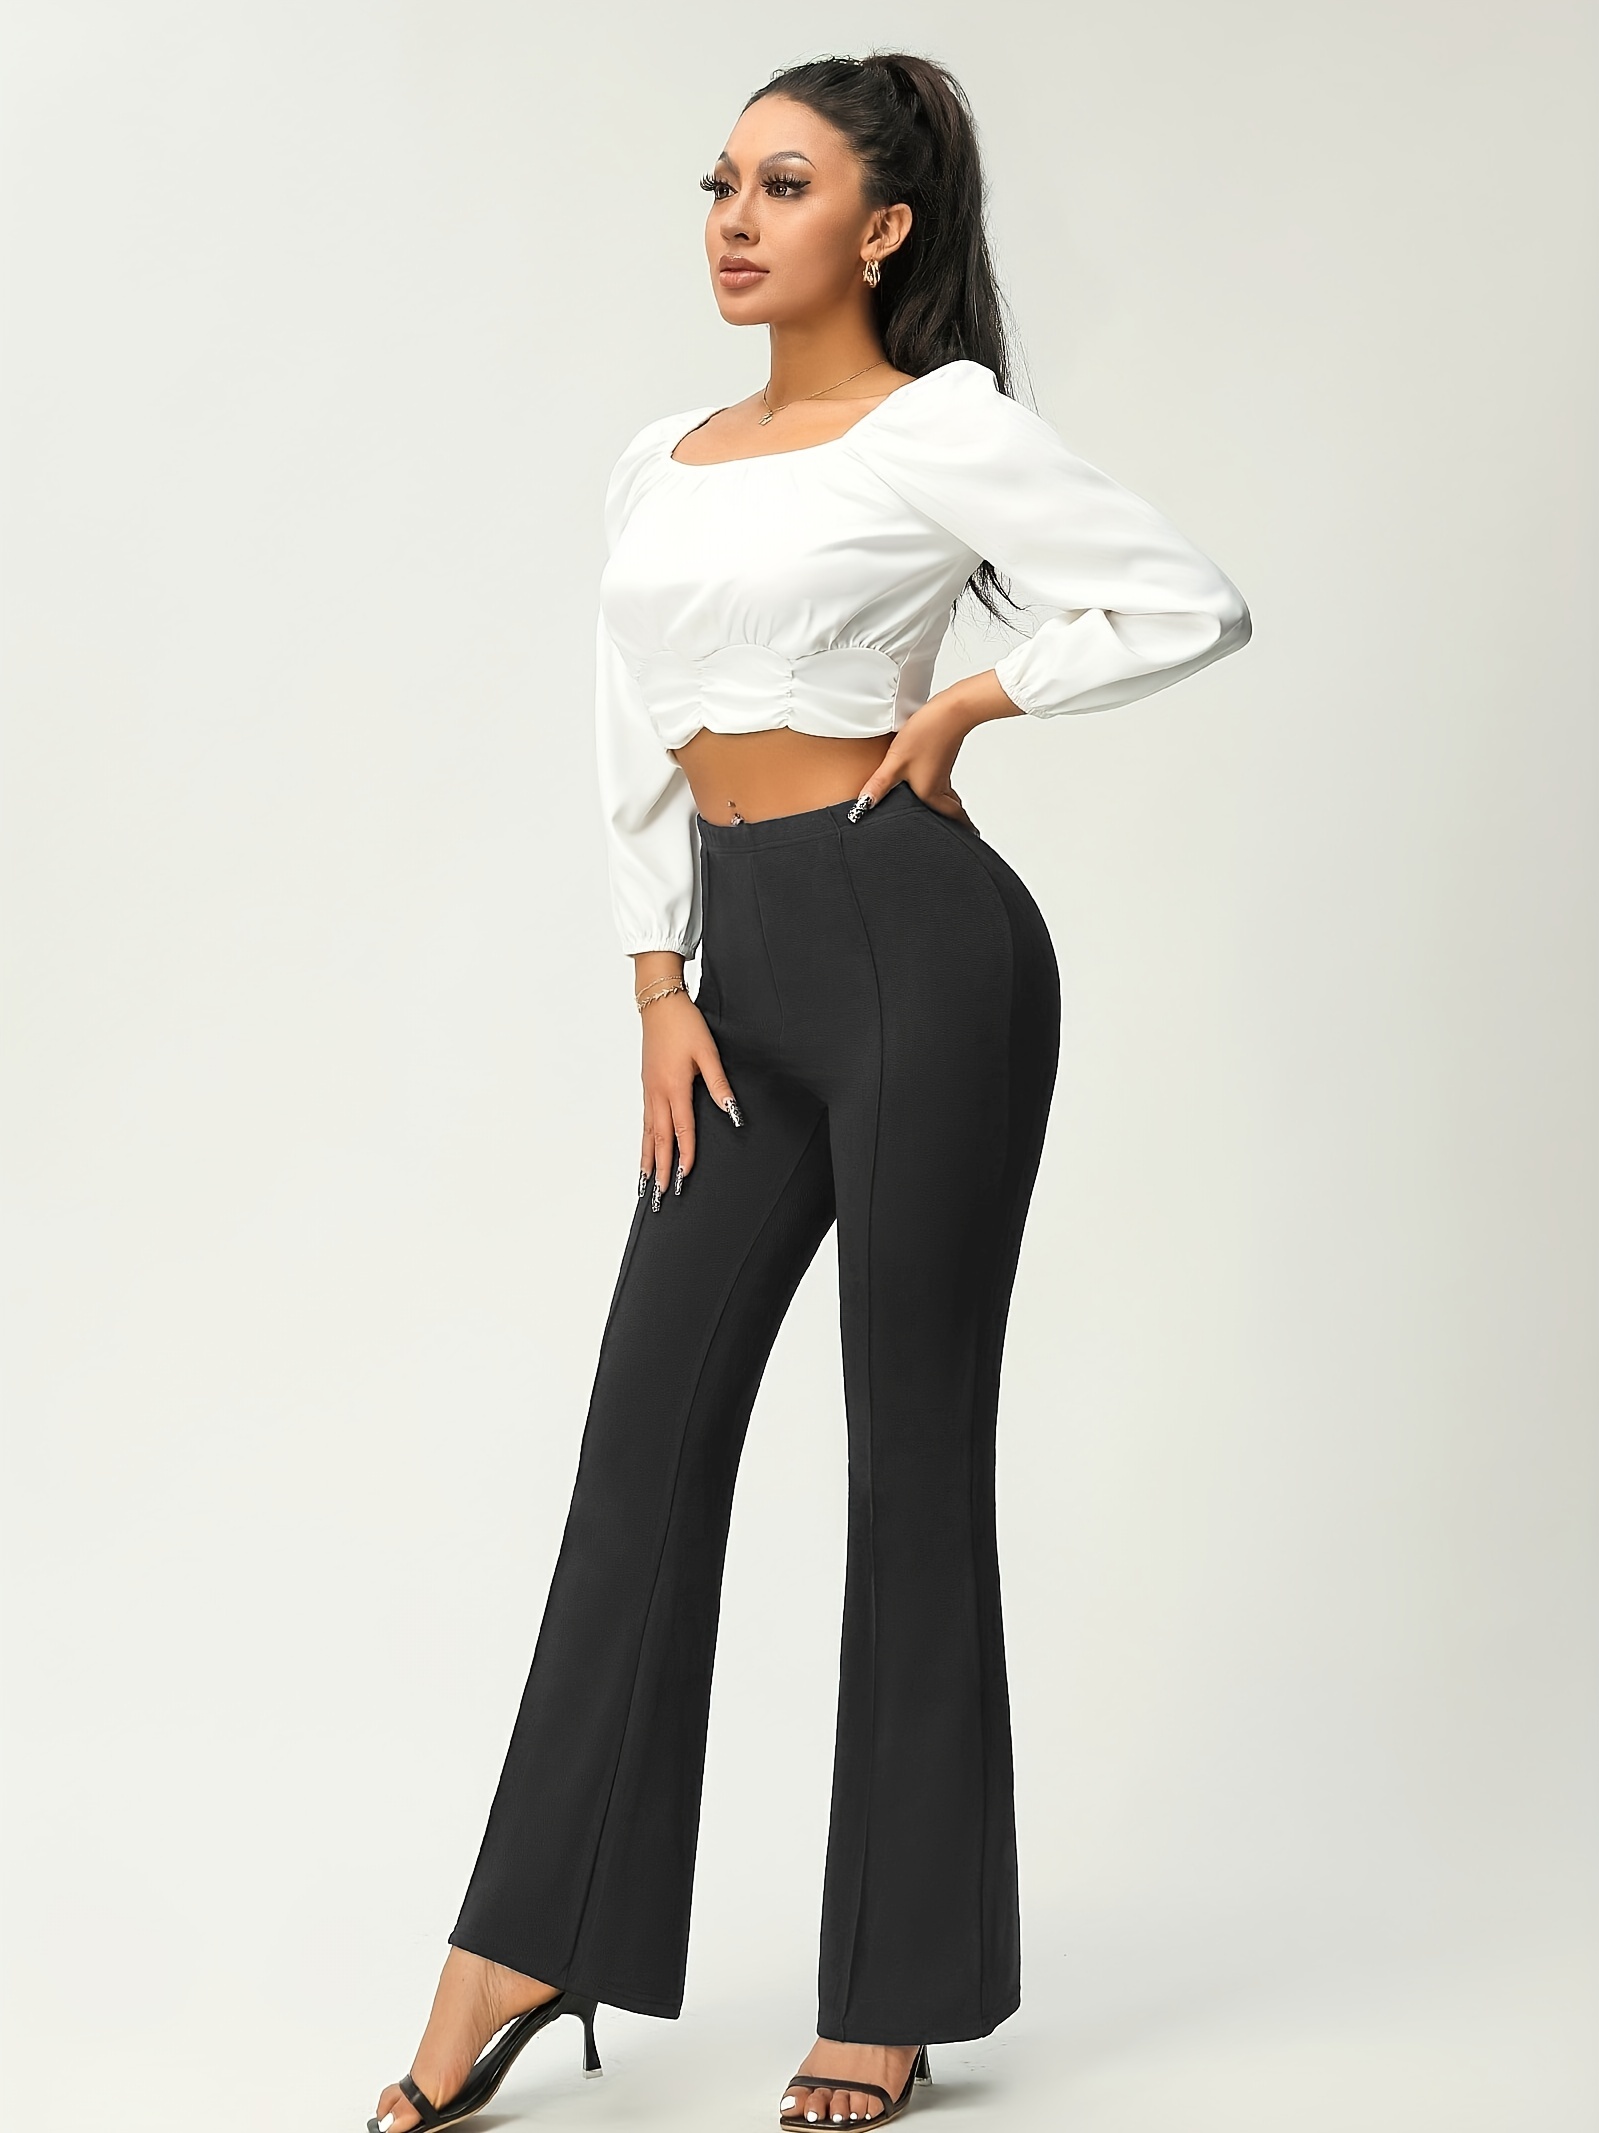 Flare Trousers for Women Low Waist Solid Color Tight Stretchy Long